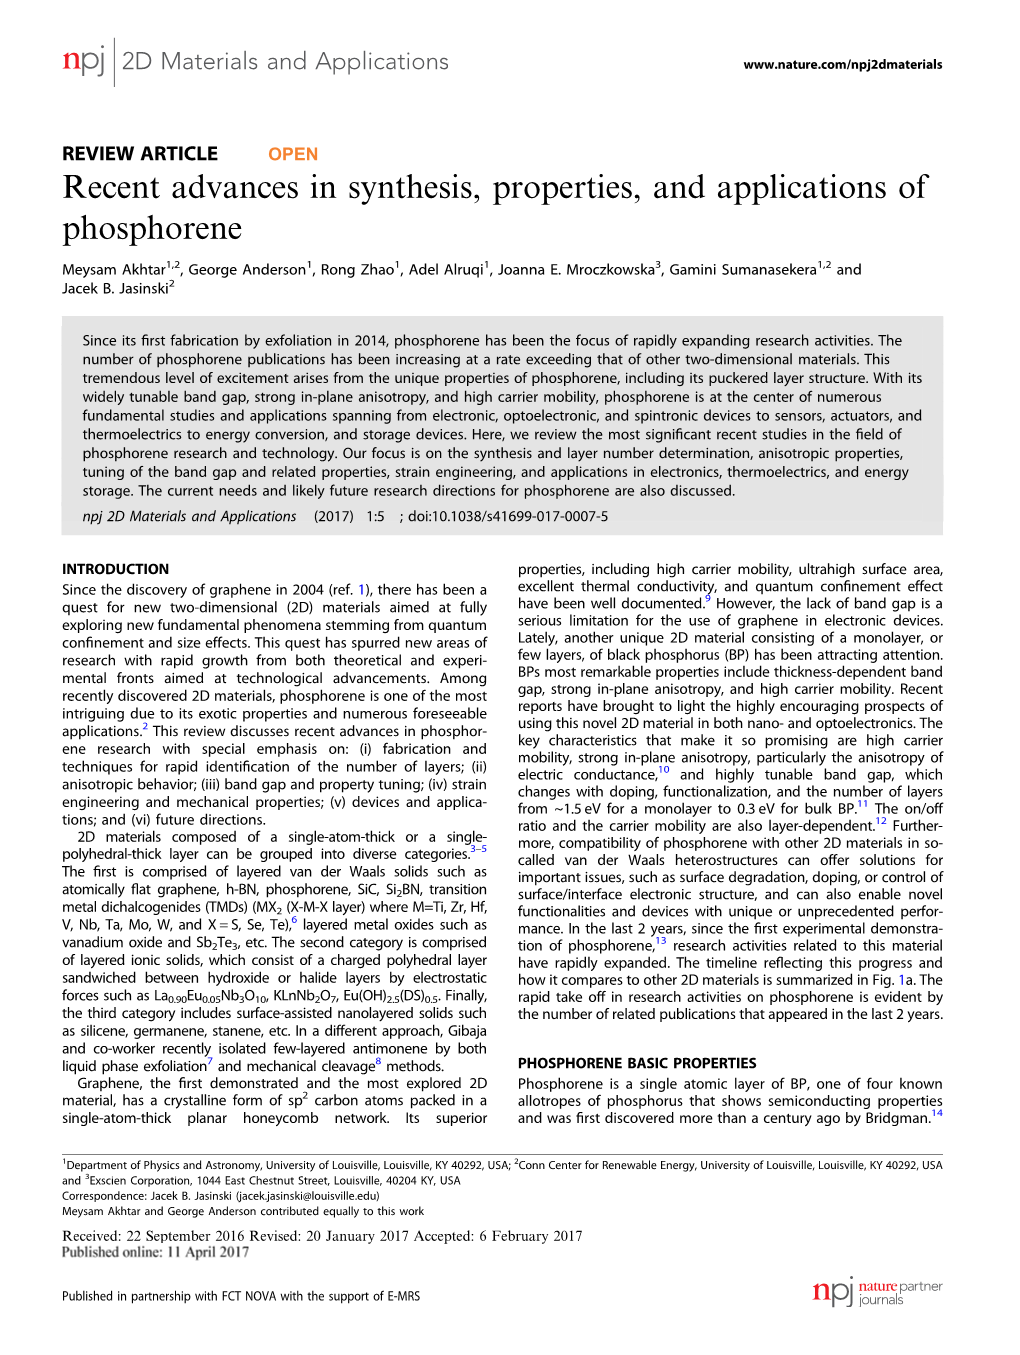 Recent Advances in Synthesis, Properties, and Applications of Phosphorene